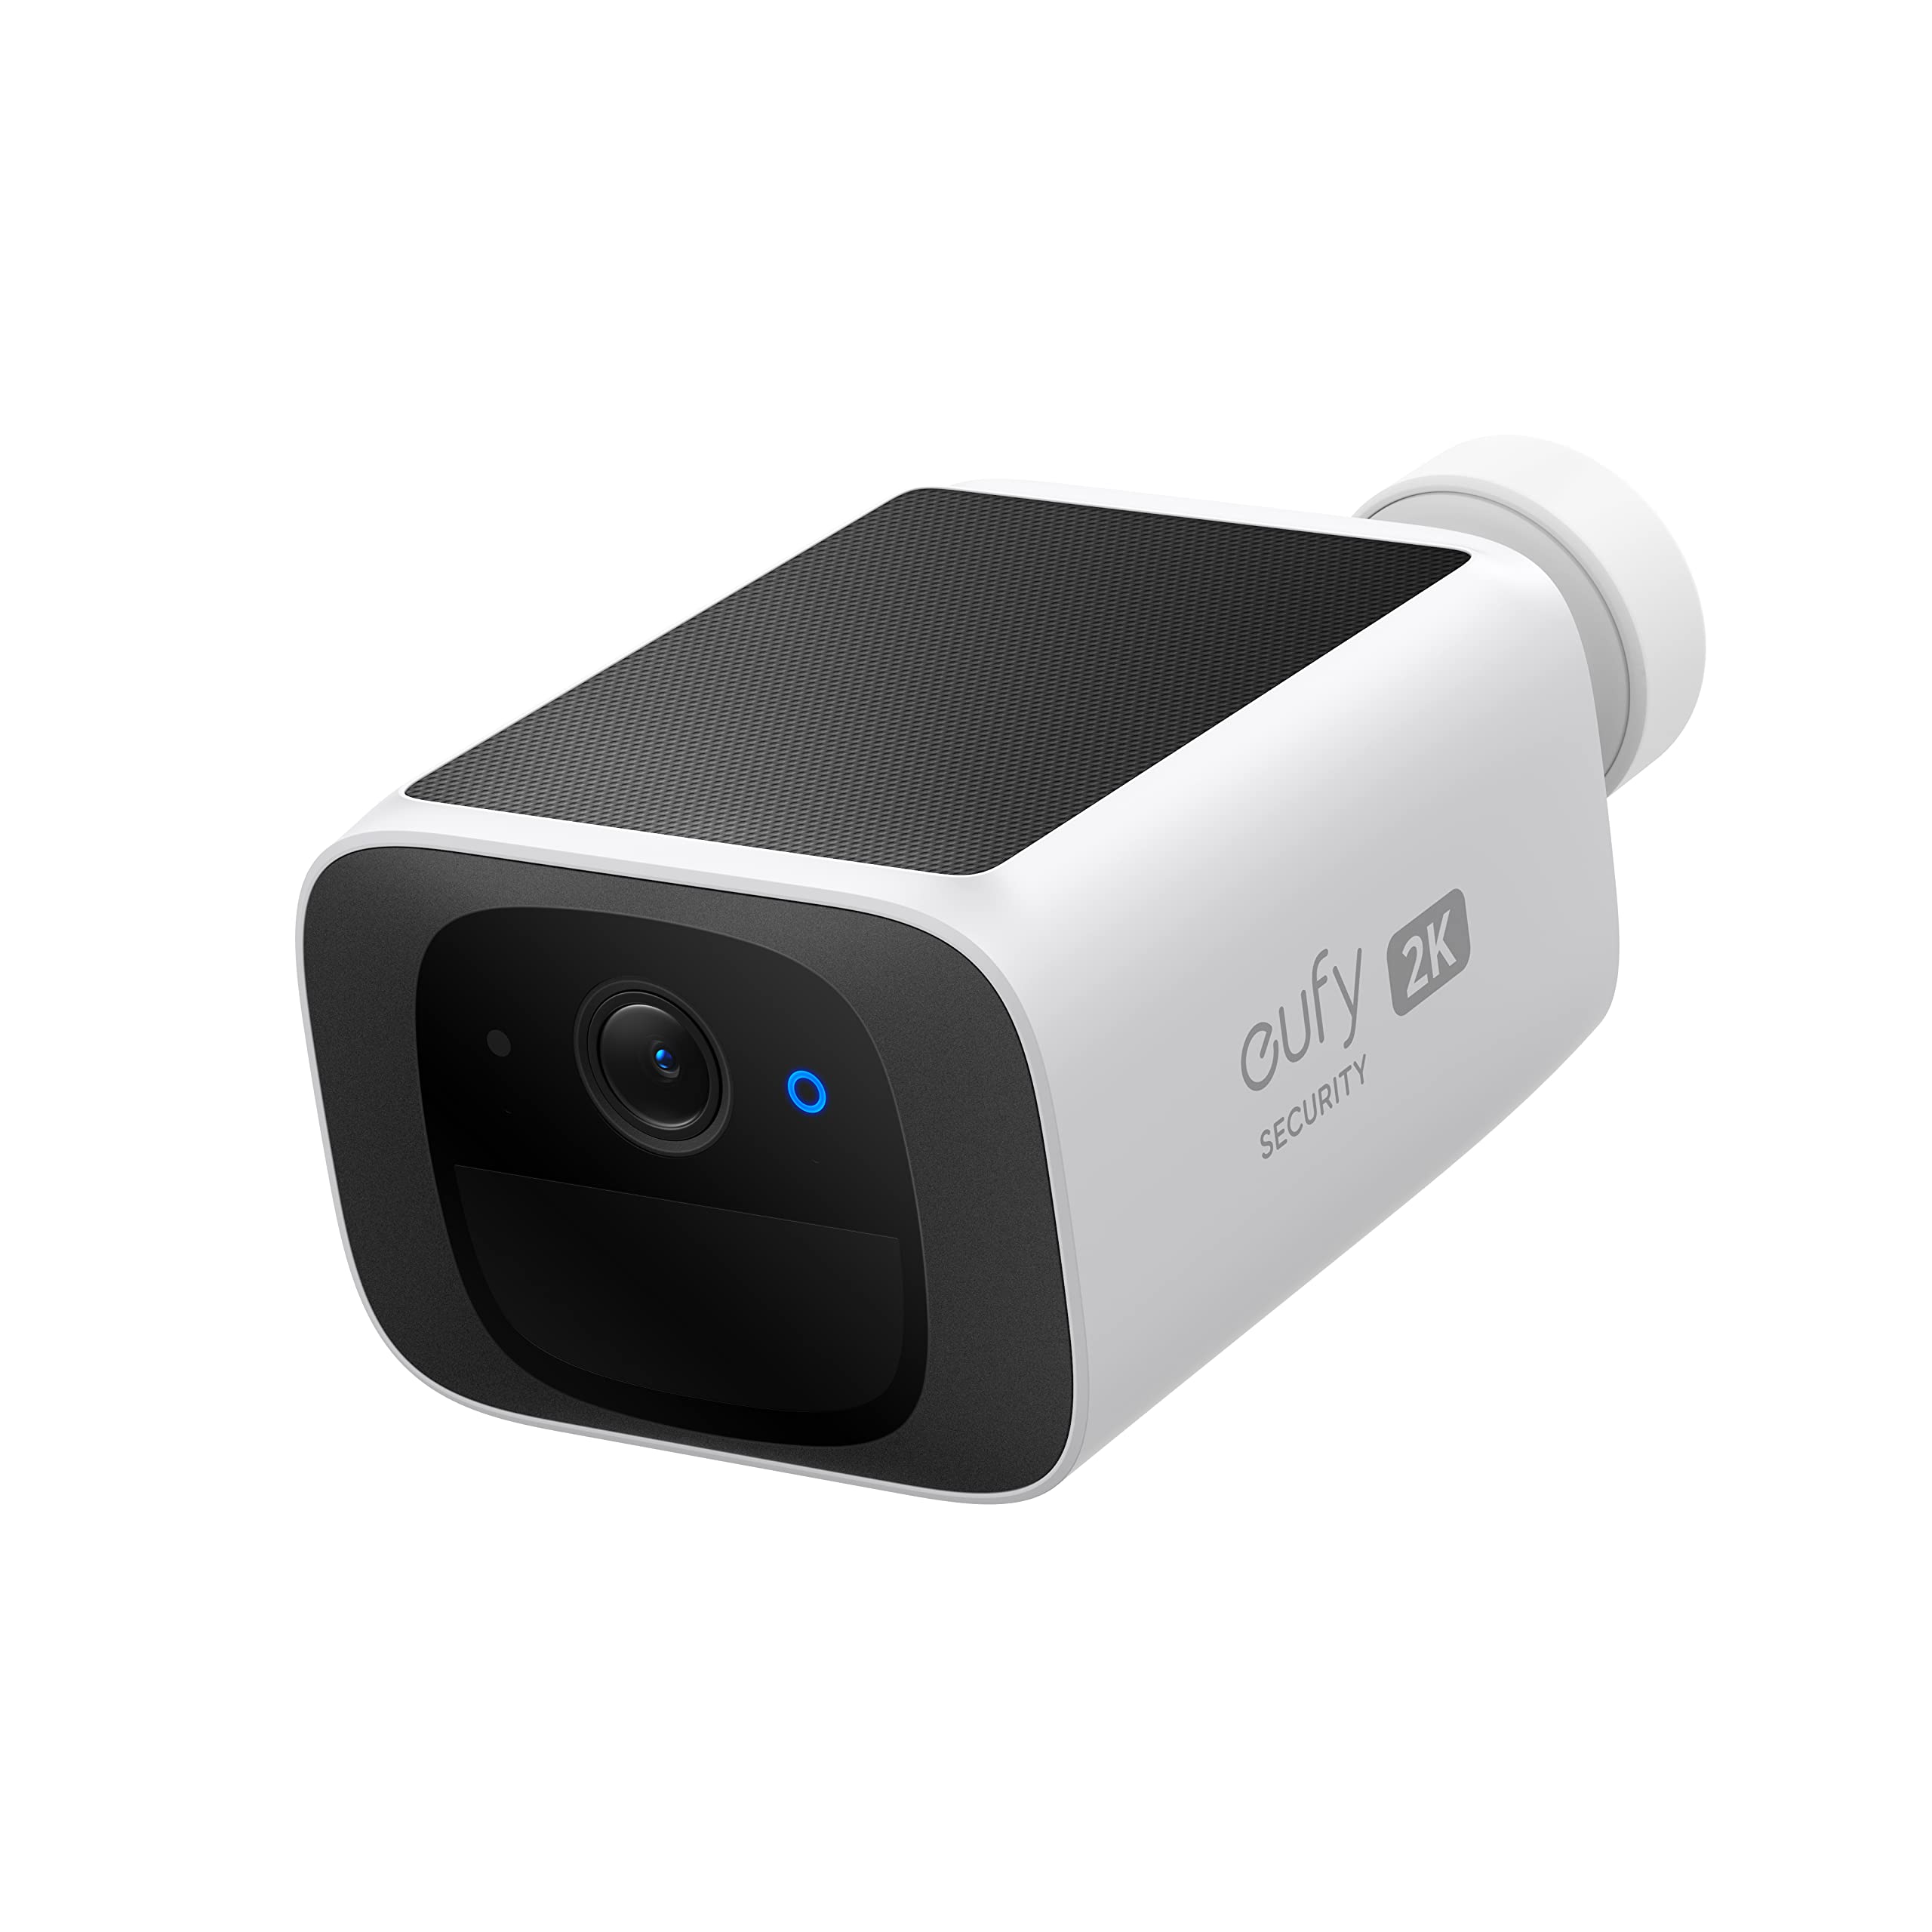 eufy Security SoloCam S220, Solar Security Camera, Wireless Outdoor Camera, Continuous Power, 2K Resolution - $89.99 with code S2201PACK